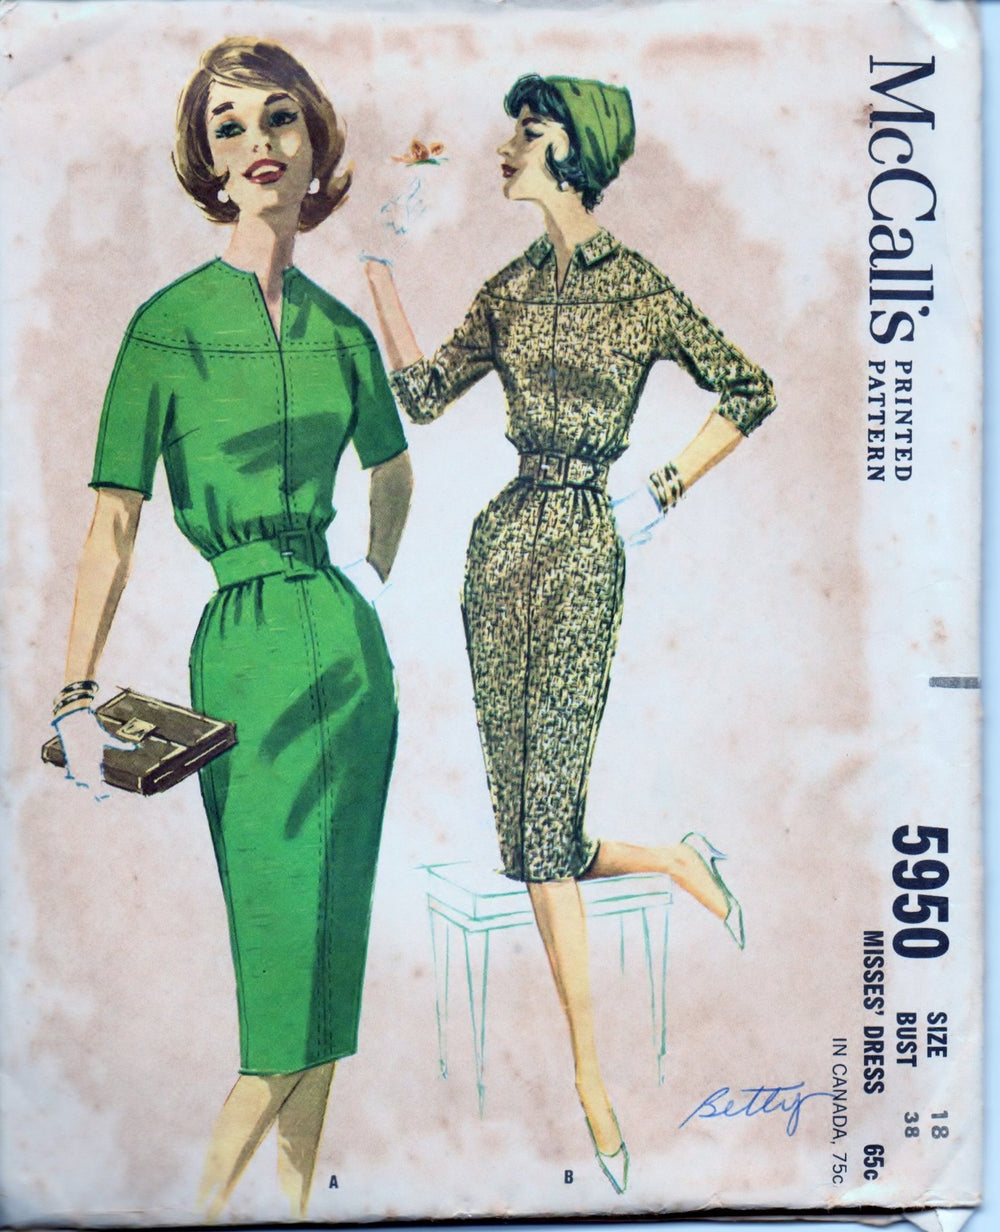 McCall's 5950 Ladies Dress with Bloused Bodice Vintage 1960's Sewing Pattern - VintageStitching - Vintage Sewing Patterns